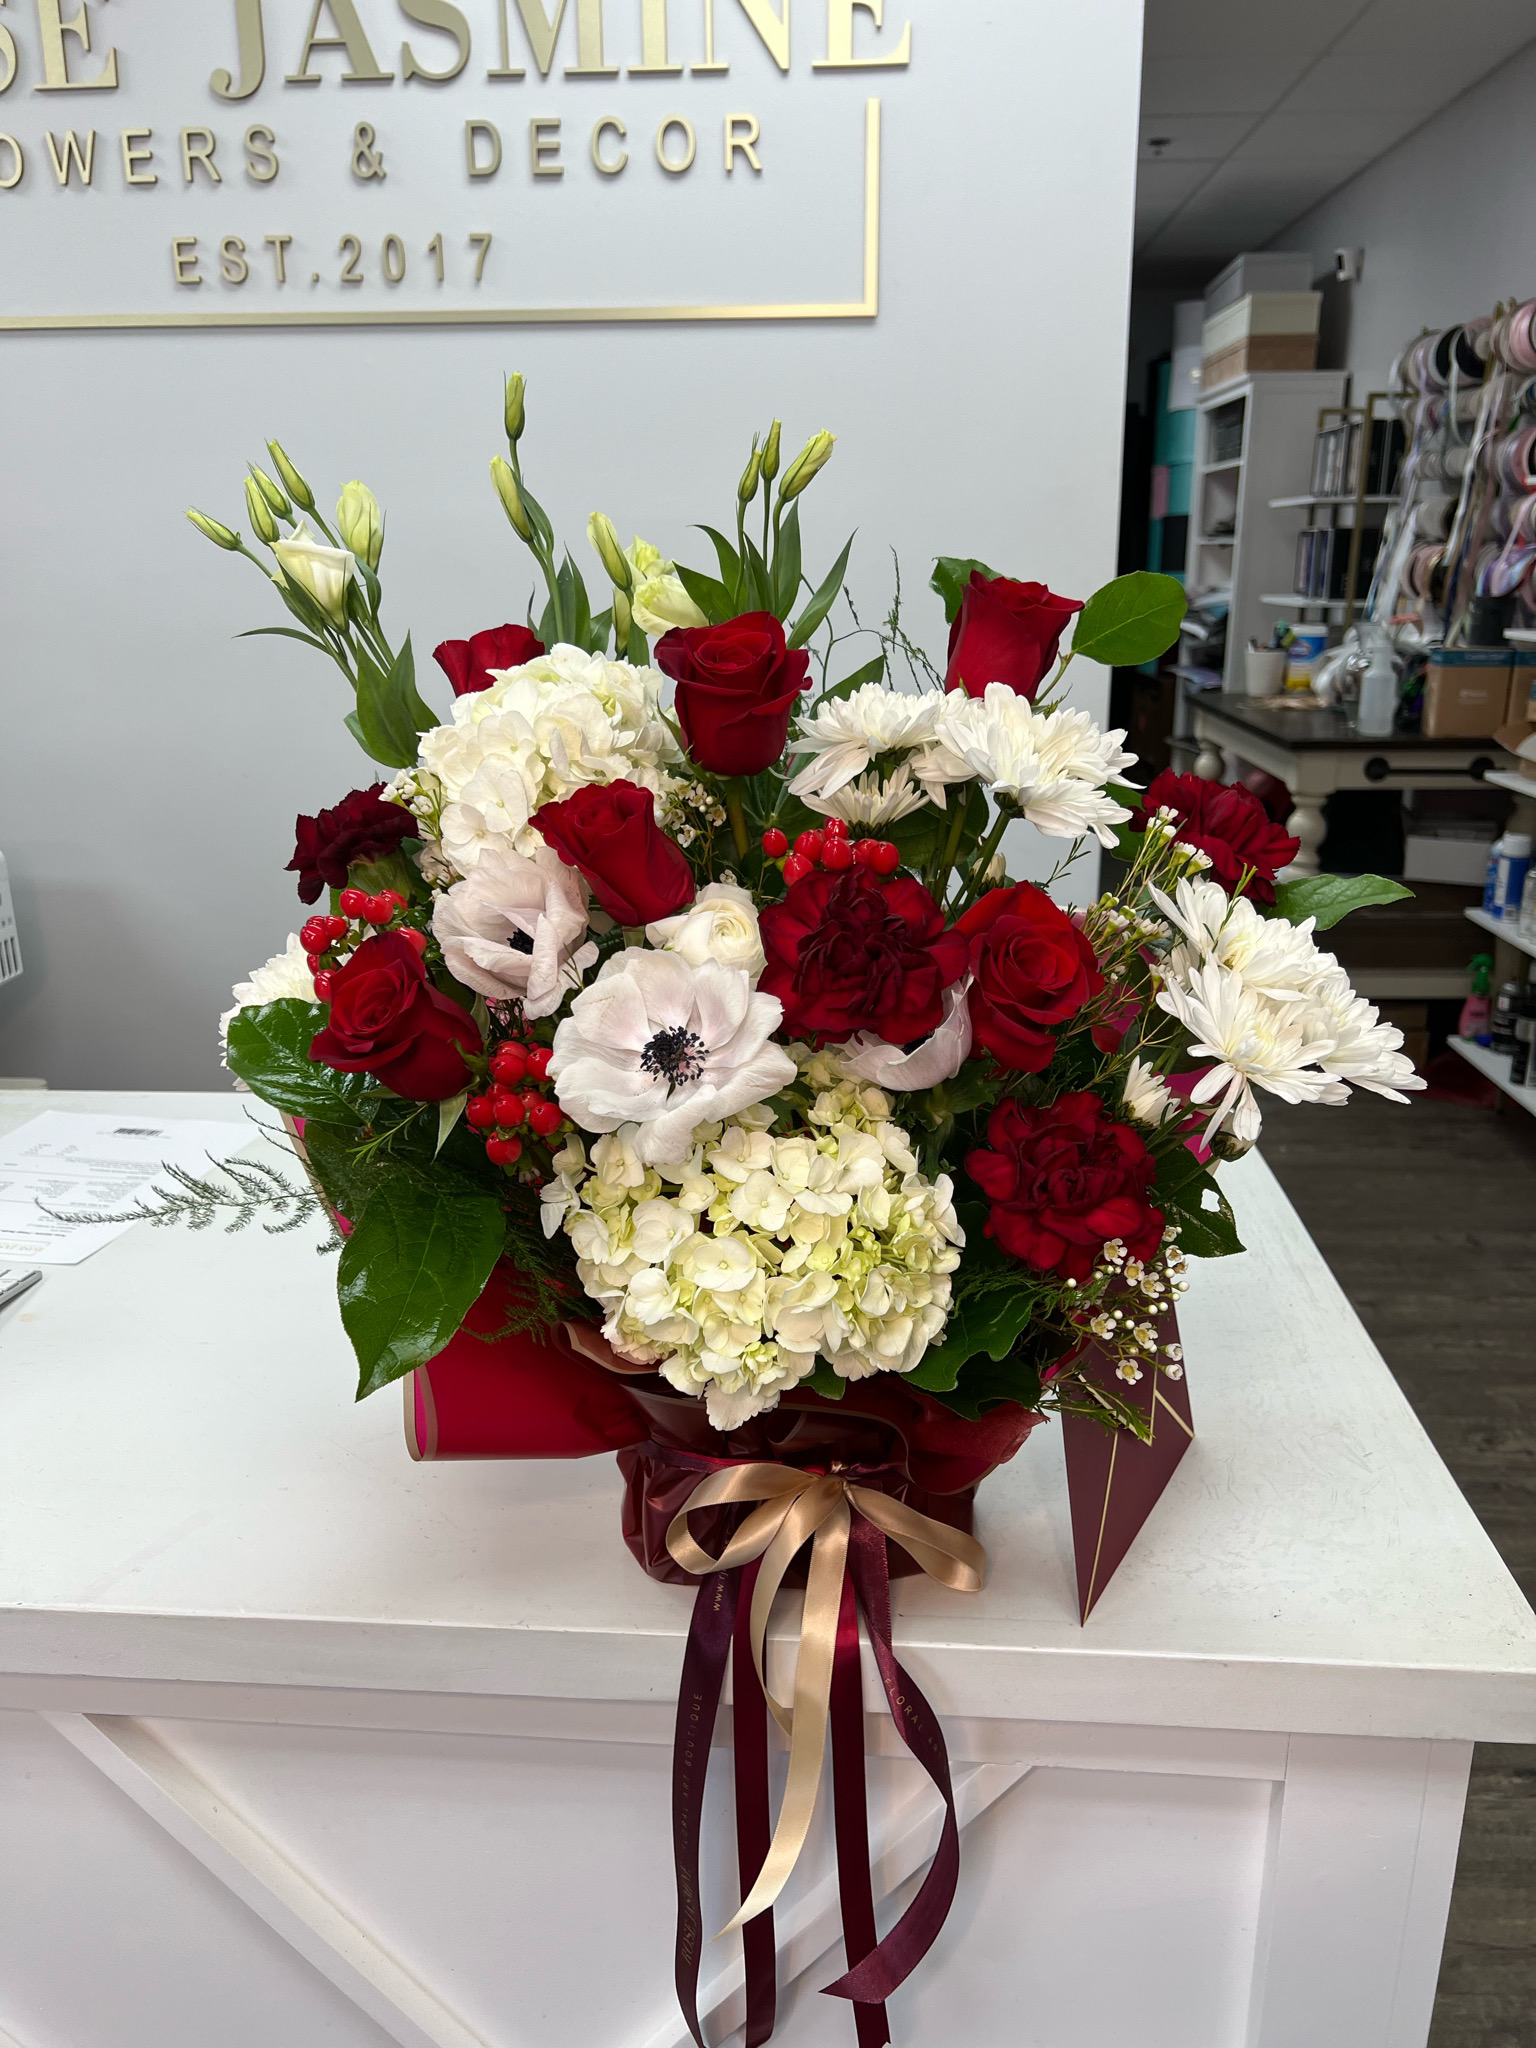 Wrapped Arrangements – Rose Jasmine – Florist. Flower Store. Same Day  Flower Delivery. Voted Best of Atlanta by The Atlantan Magazine.